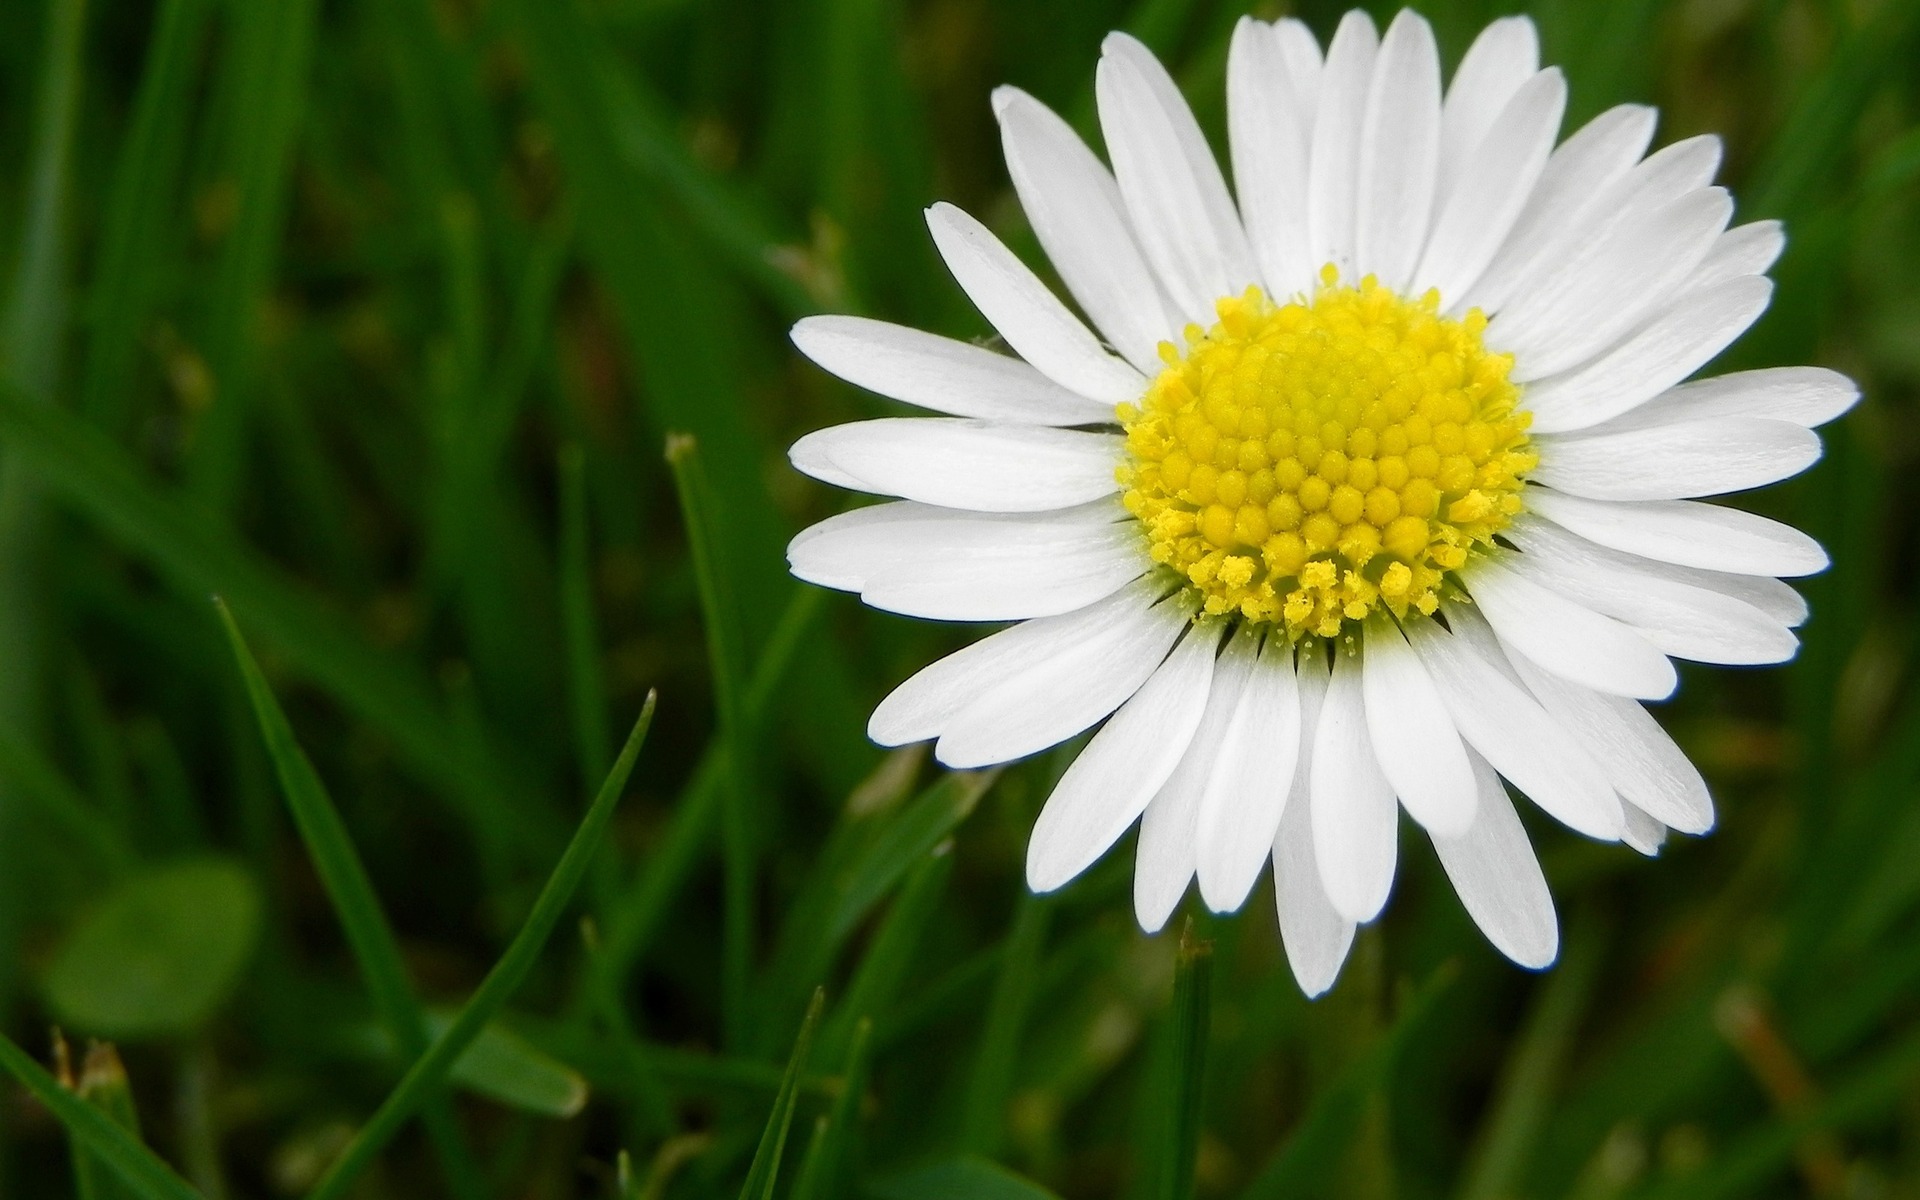 daisy flowers images and wallpapers Download